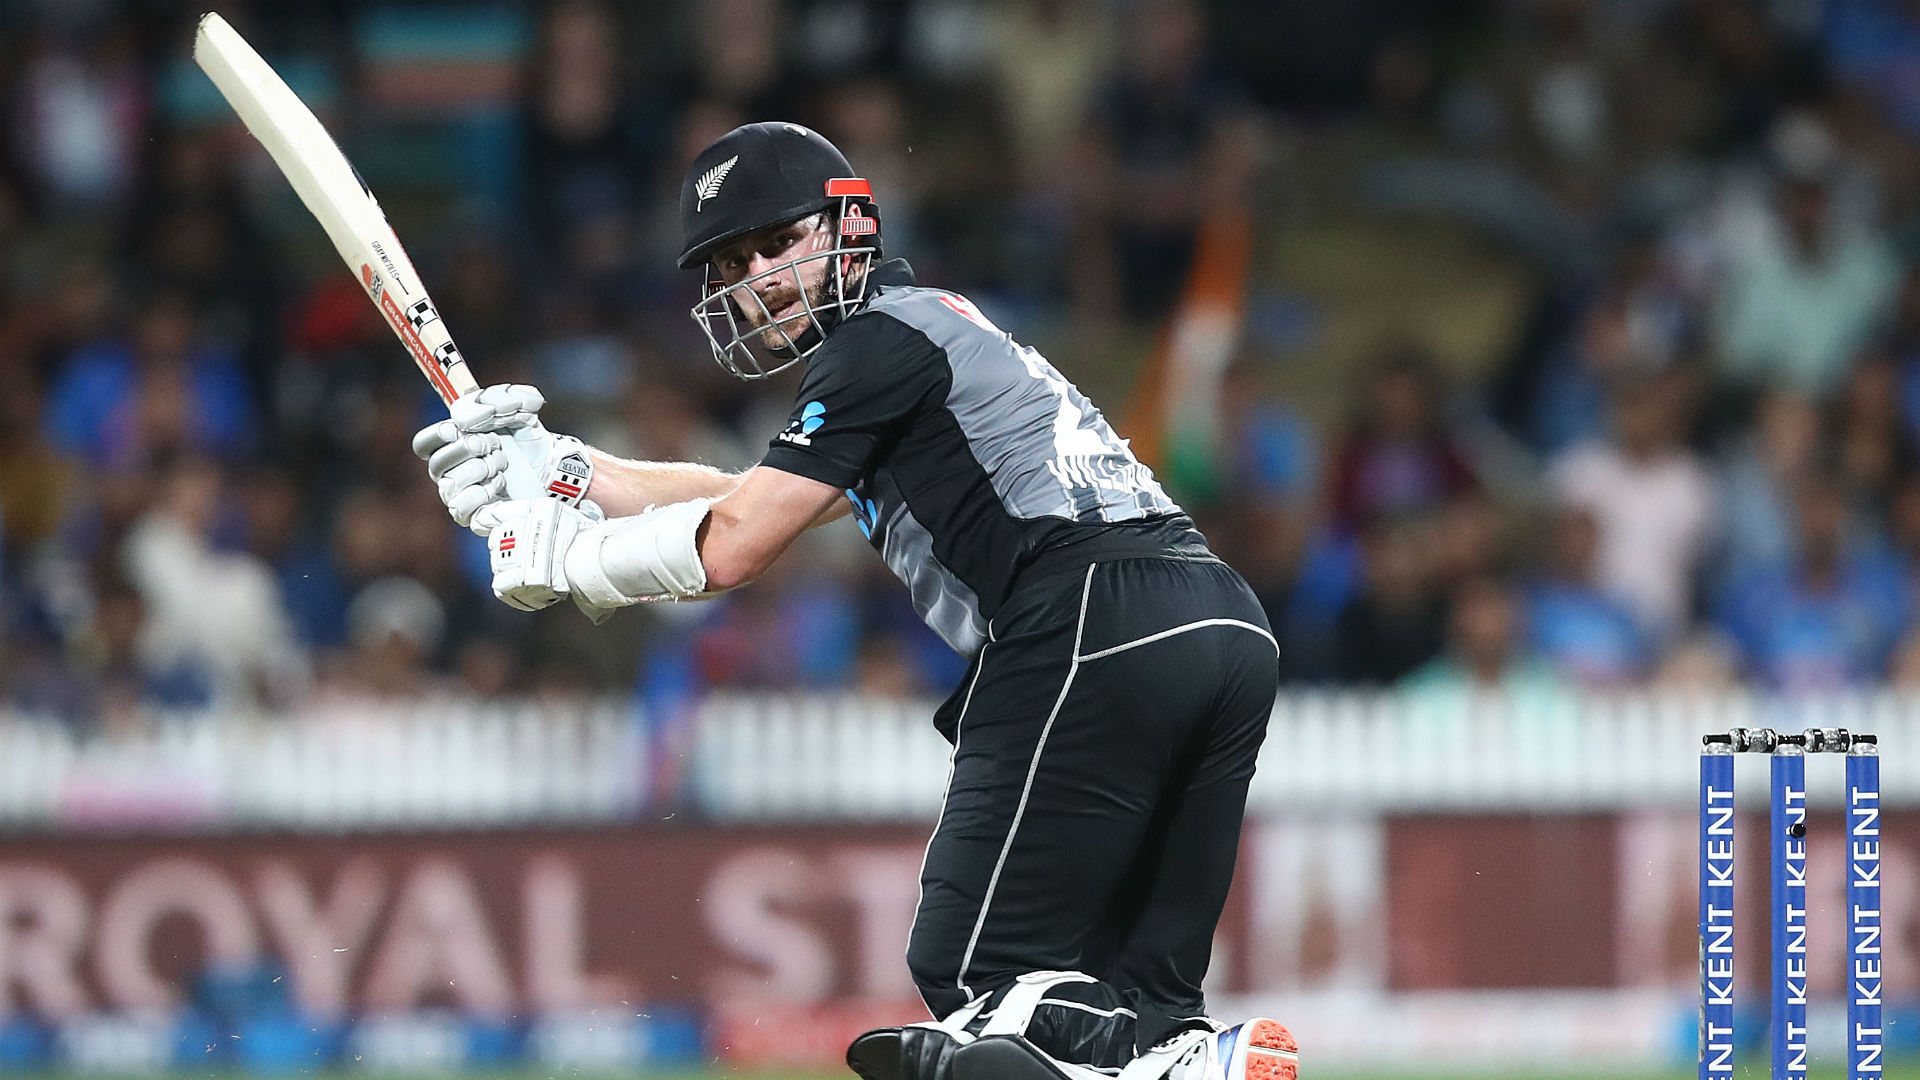 New Zealand overcame a mid-innings wobble to beat India in the third one-dayer, despite missing several key players.